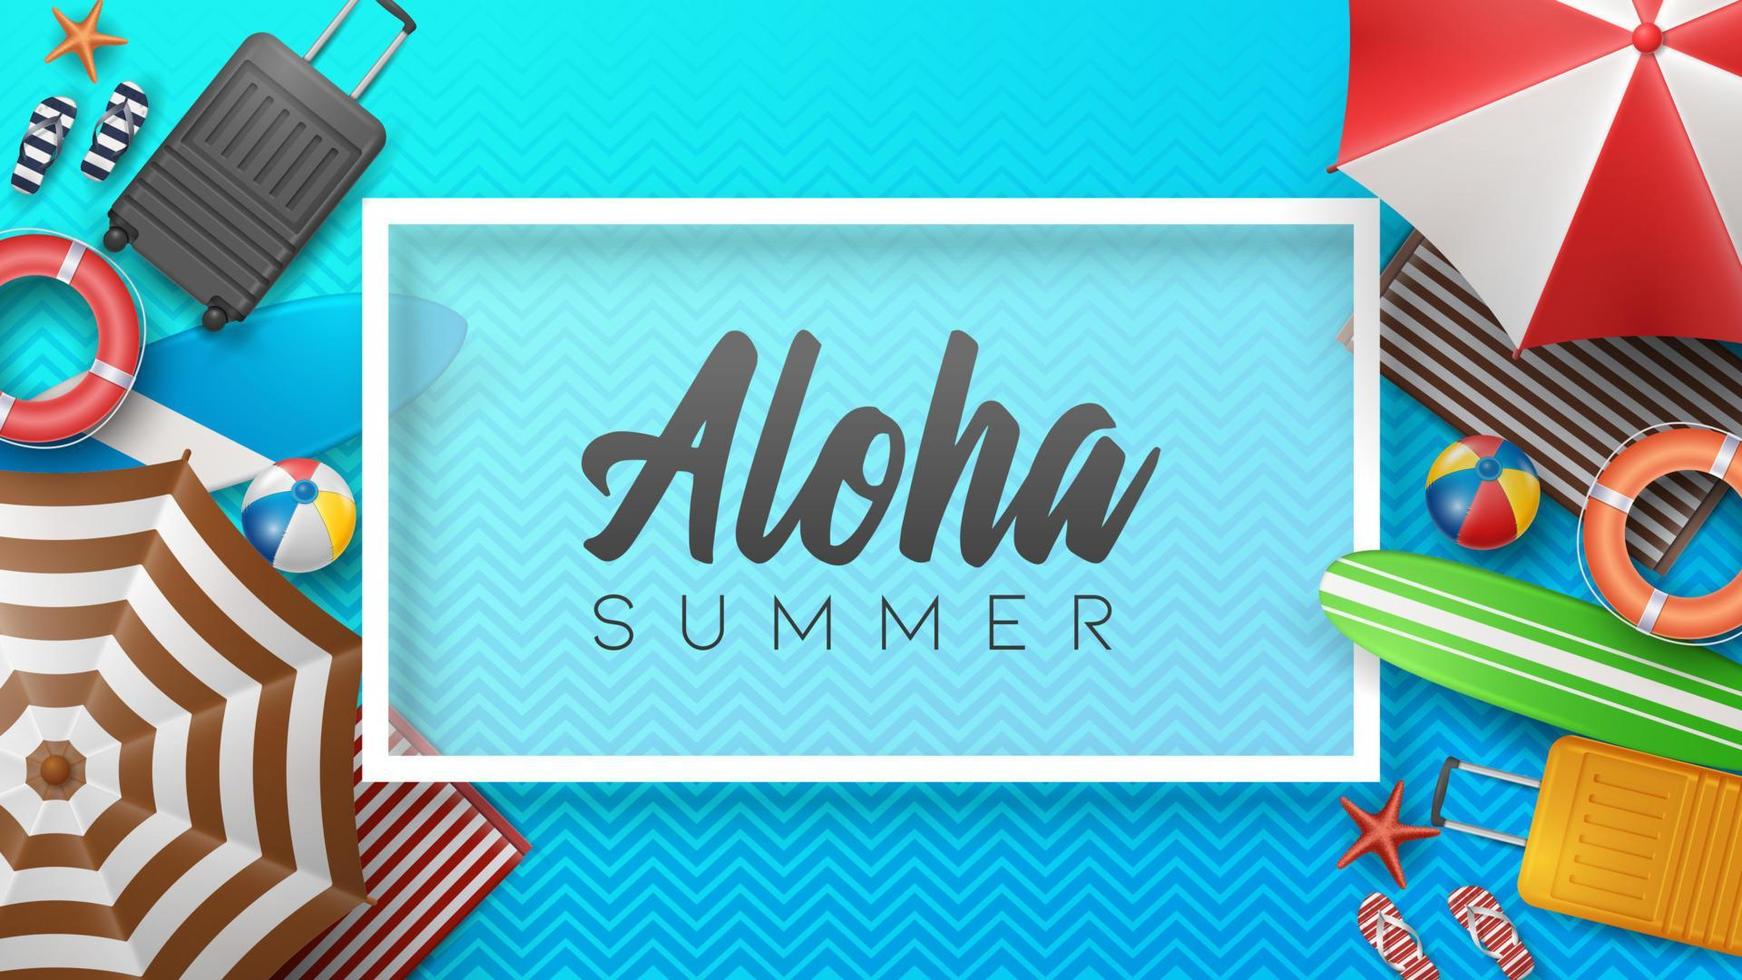 Vector Summer Holiday Illustration with Beach Ball, Palm Leaves, Surf Board and Typography Letter on Pattern Background.